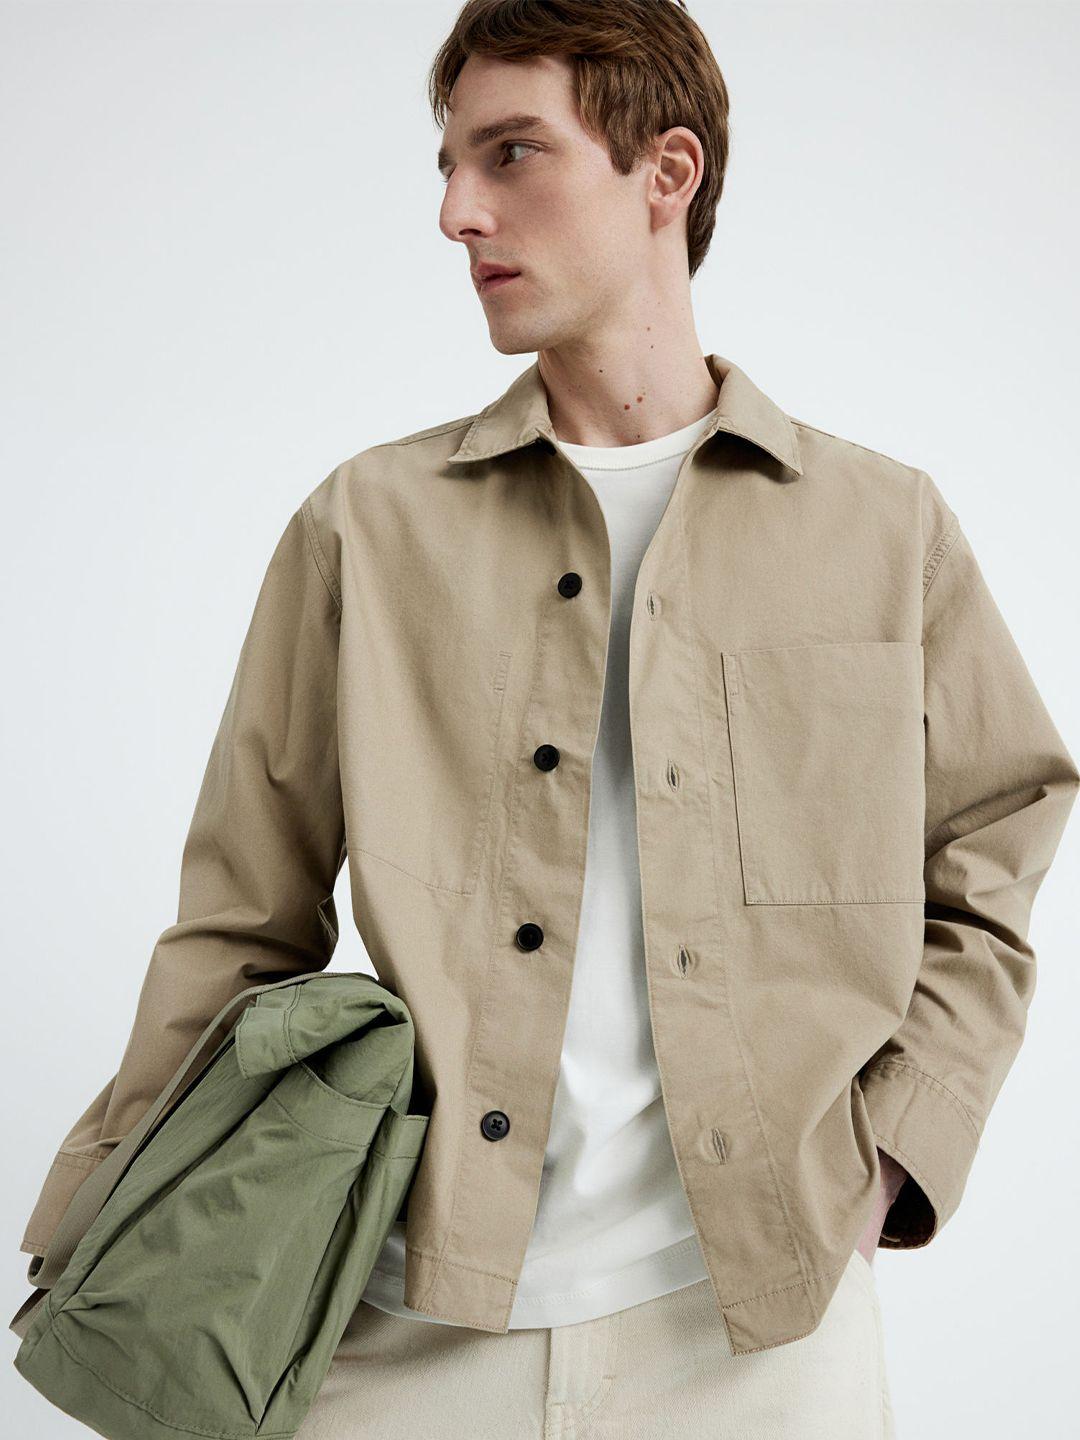 h&m loose fit twill overshirt